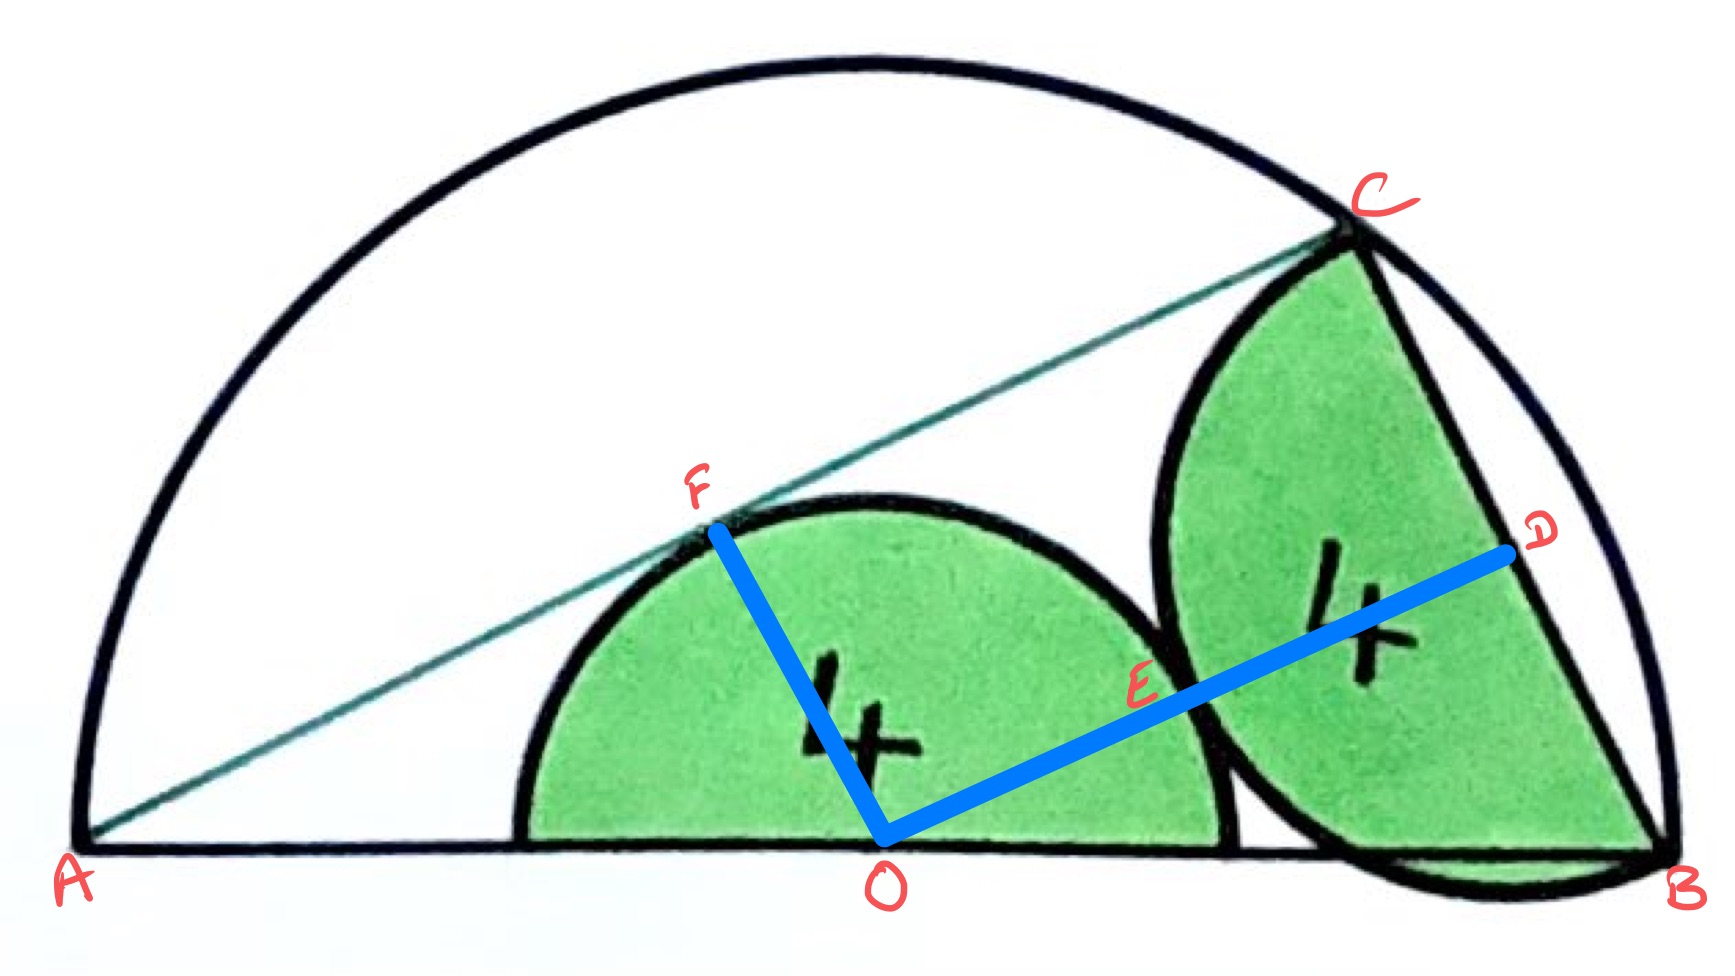 Two semi-circles in a semi-circle labelled